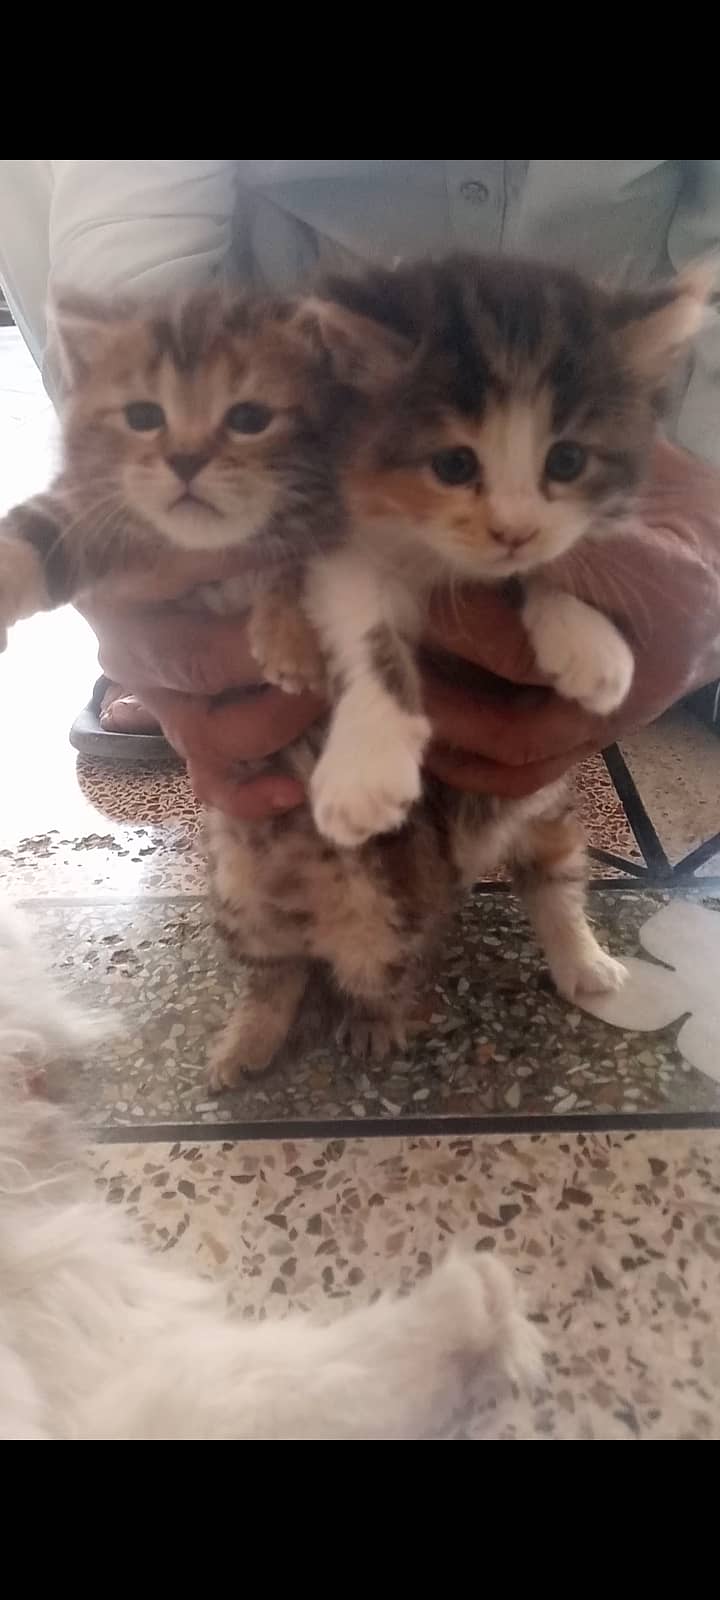 Baby cats 2